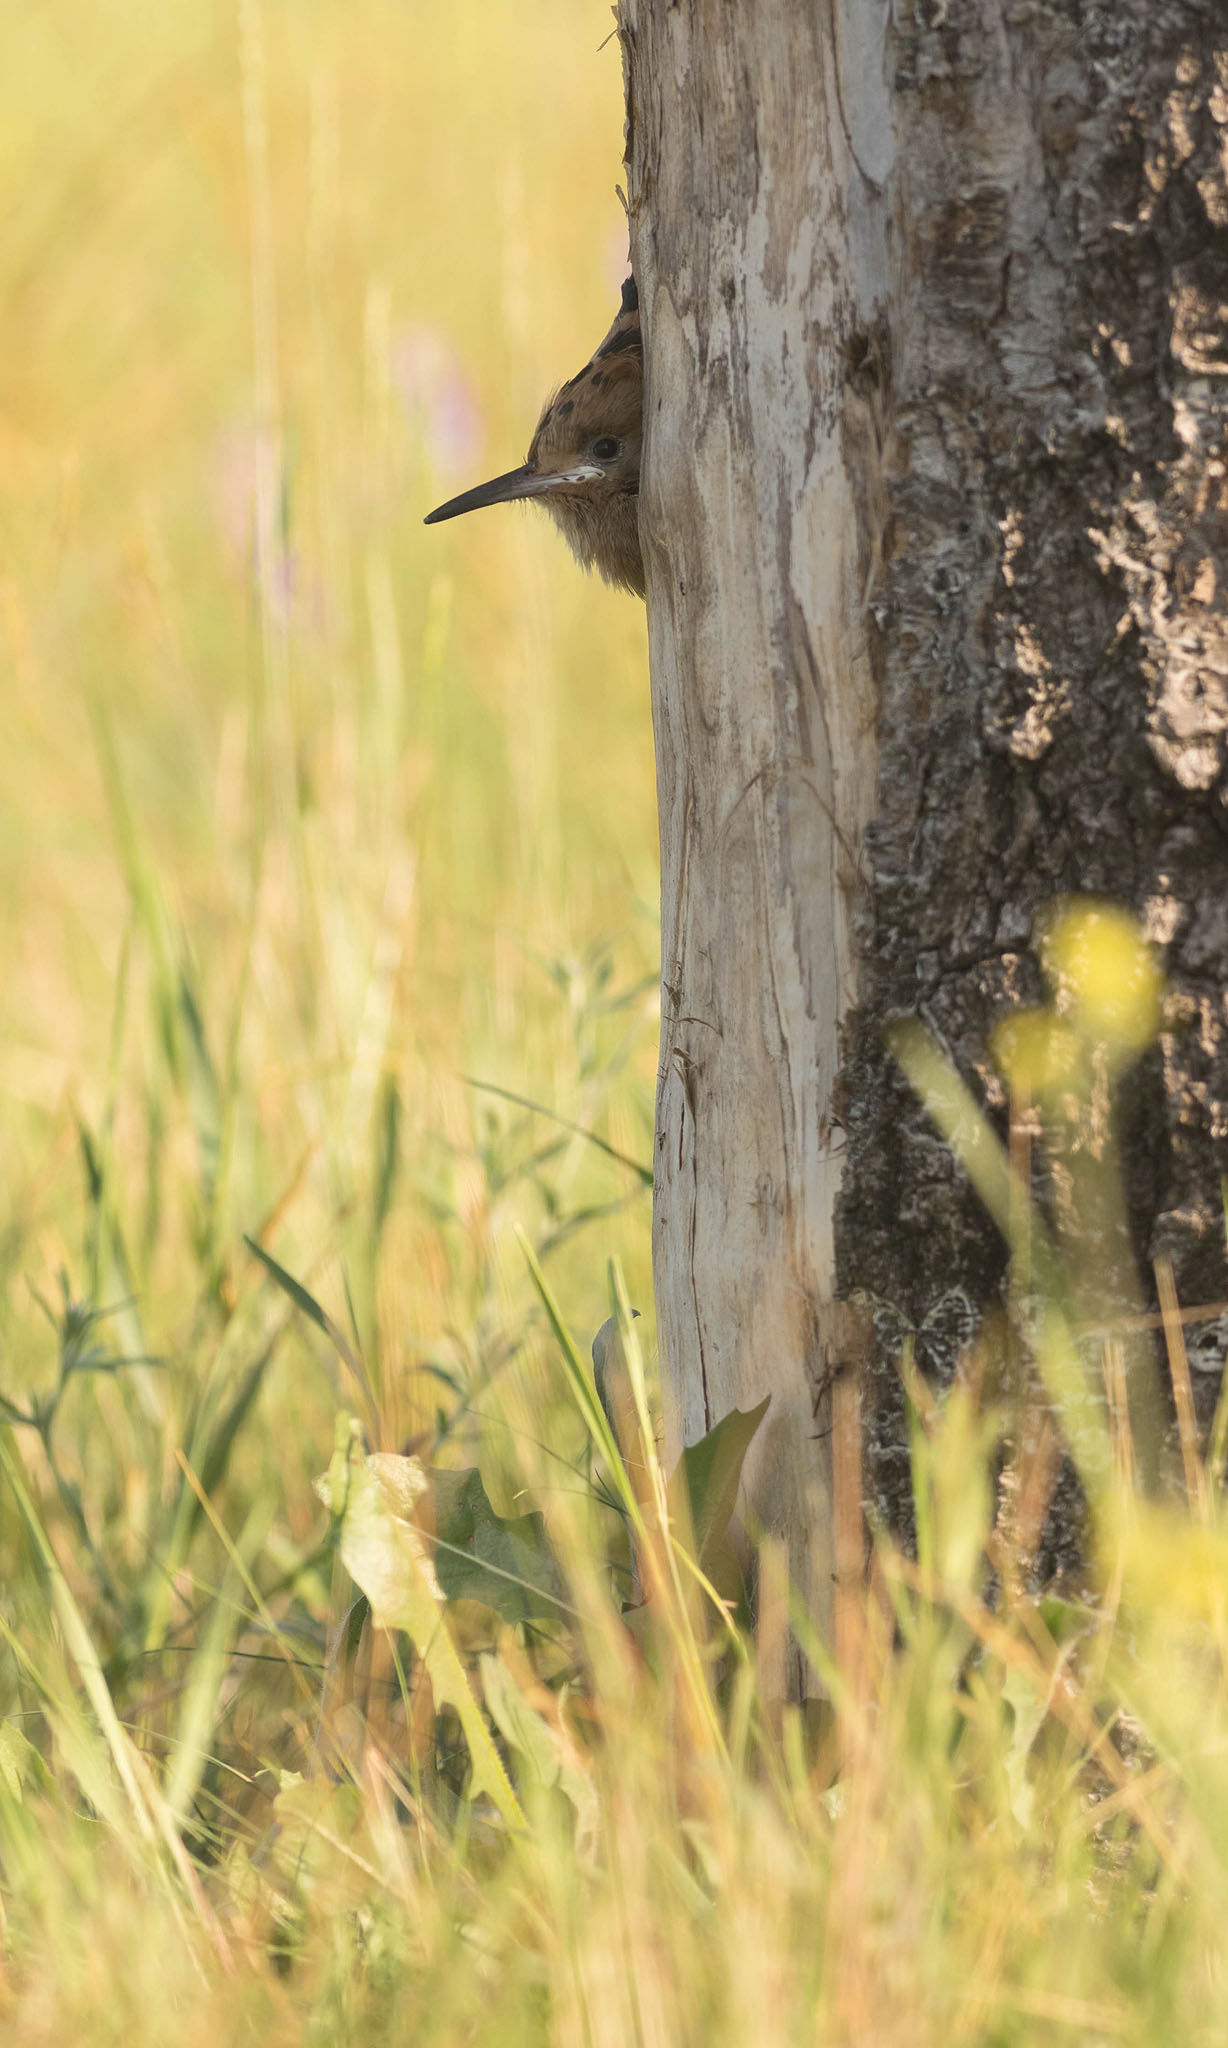 hoopoe chick peering out of nest hole in a tree in serbia